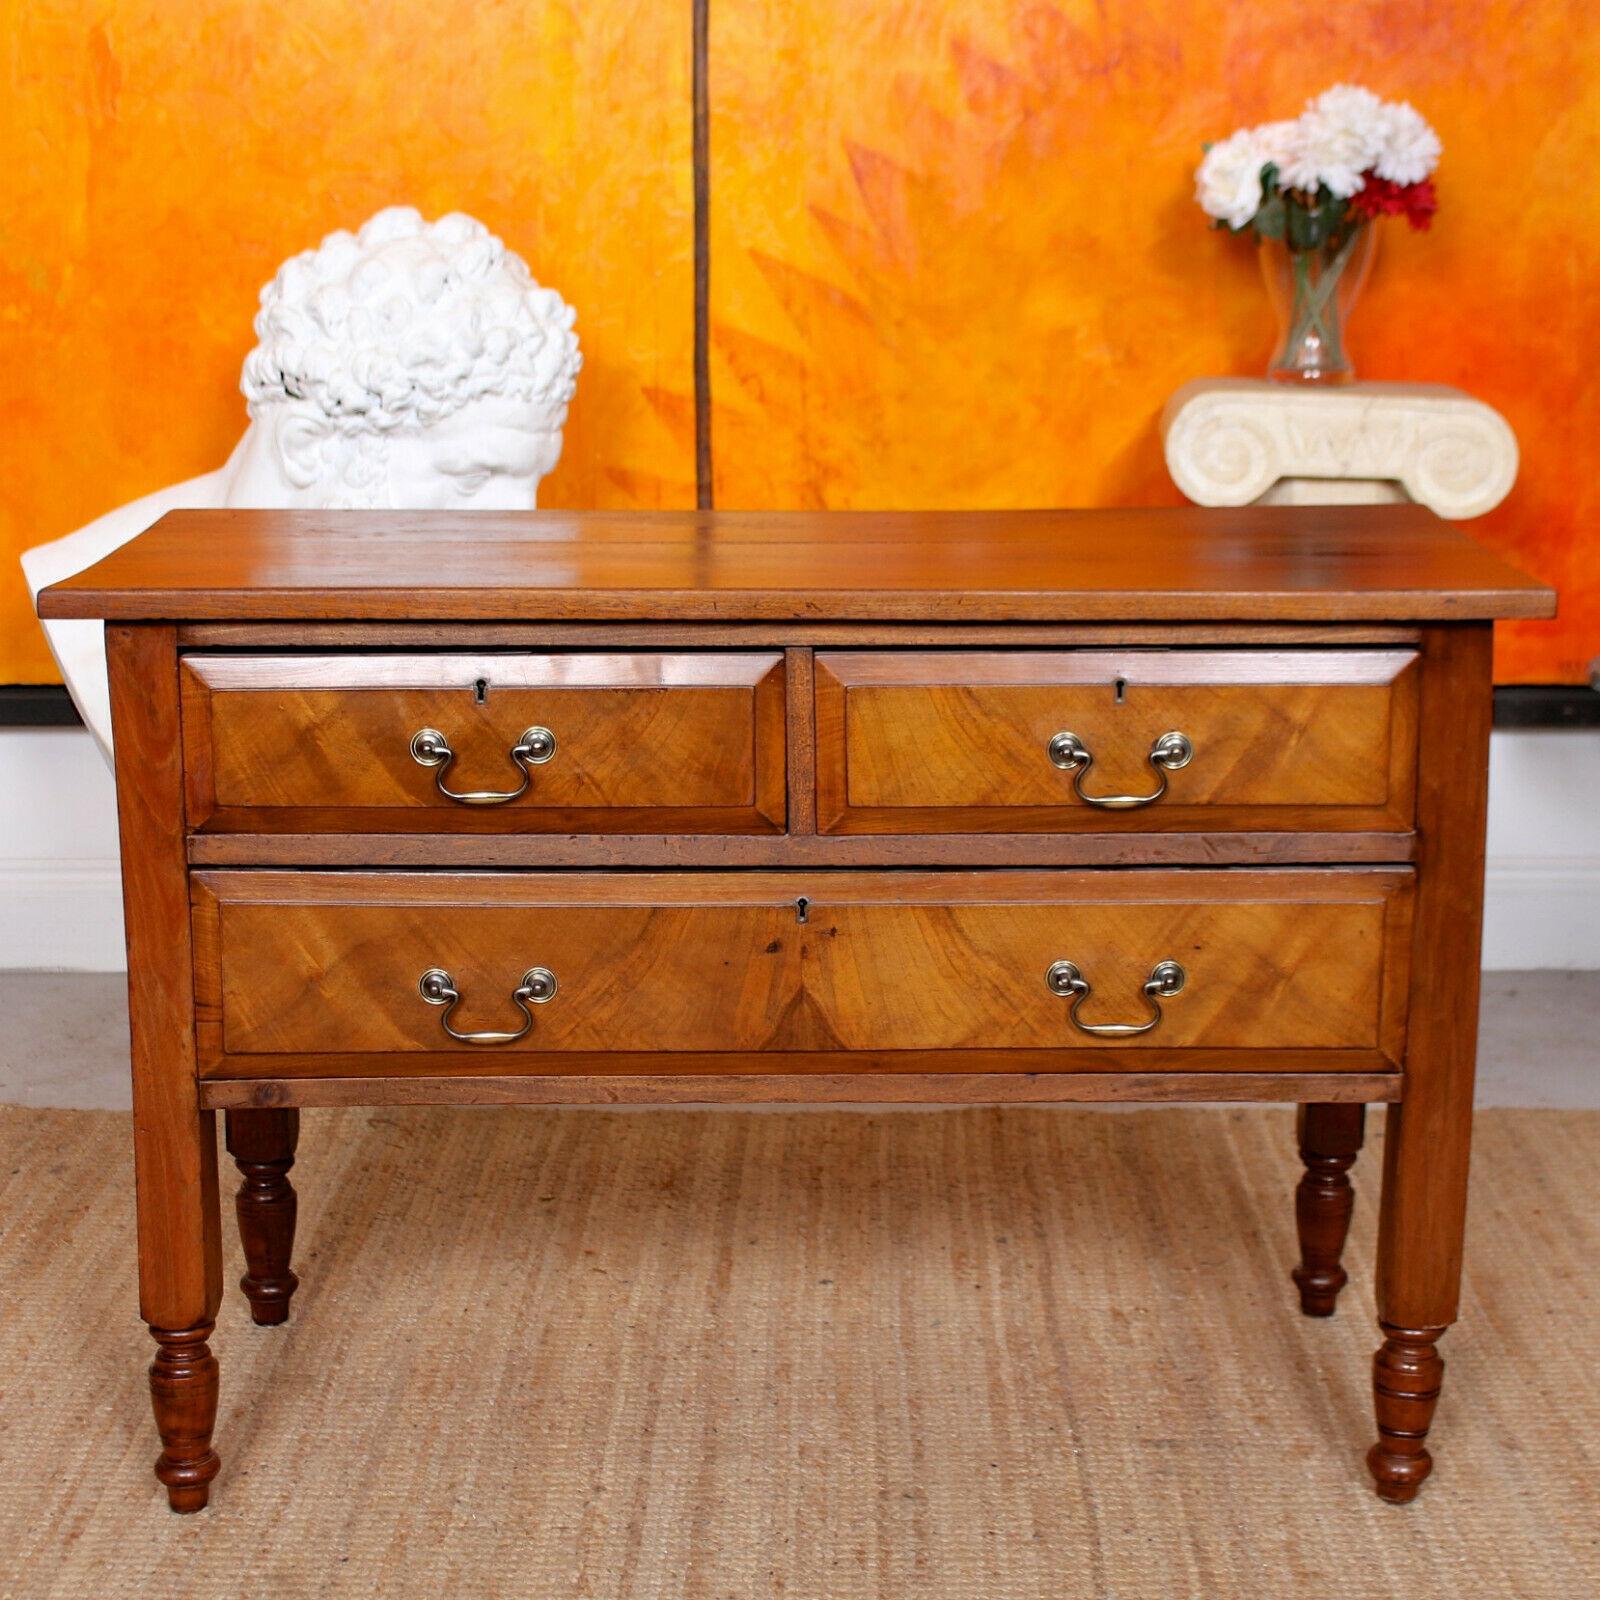 An impressive Edwardian mahogany chest of drawers.

Constructed from solid mahogany boasting a well figured grain and rich polished patina.

Fitted two short and one long graduated drawer with dovetailed jointing, oak lined interiors and mounted